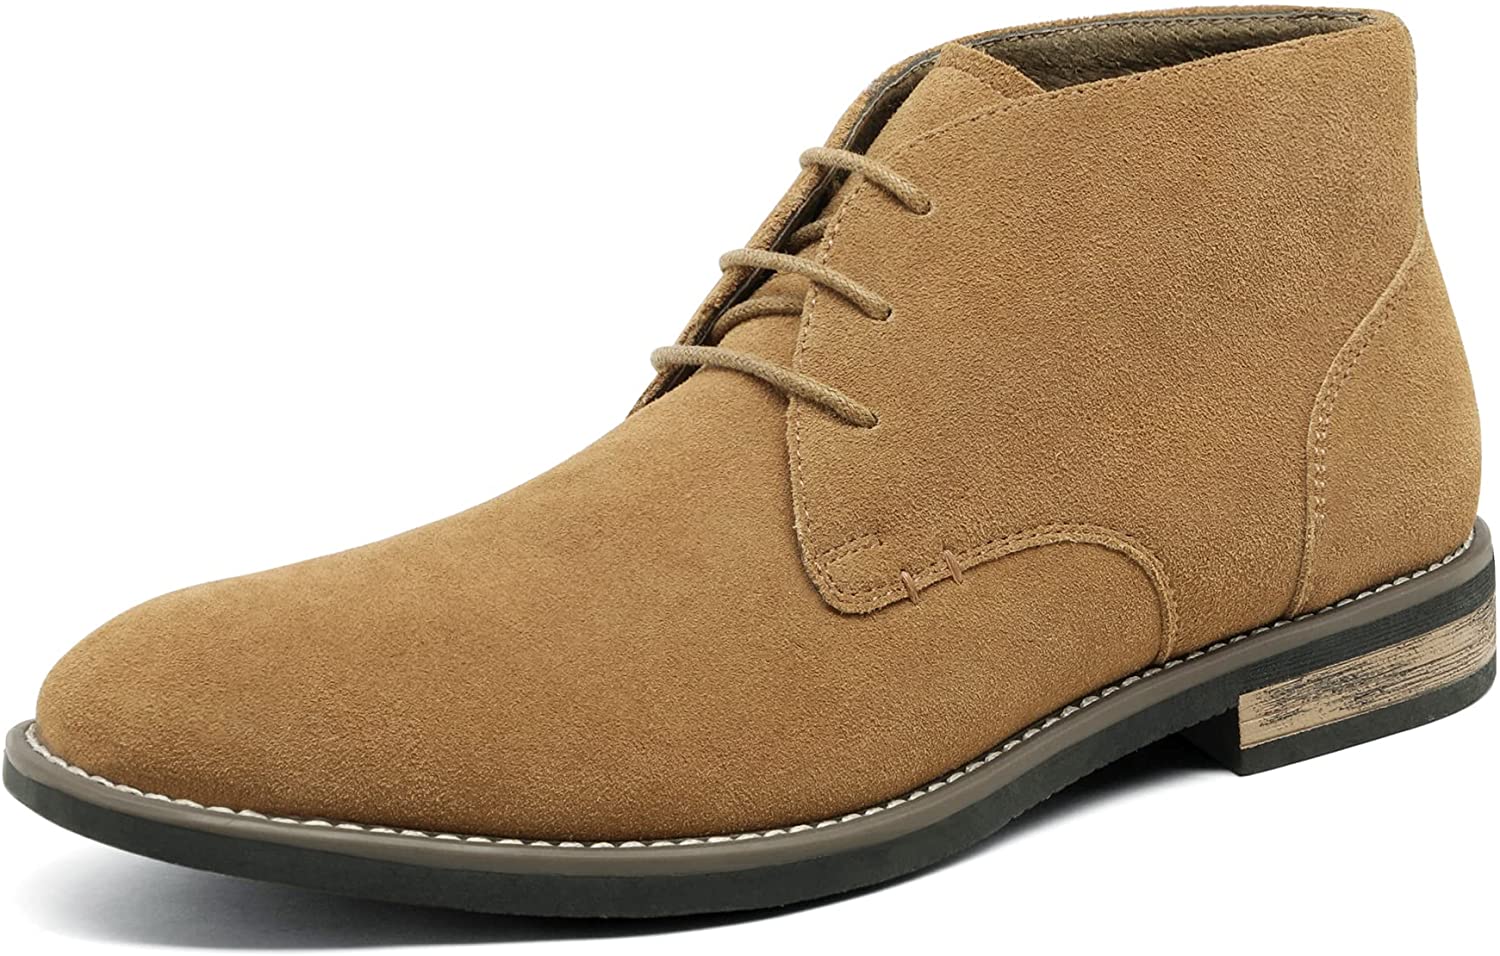 Bruno Marc Men's Suede Leather Lace Up Oxfords Chukka Ankle Boots 